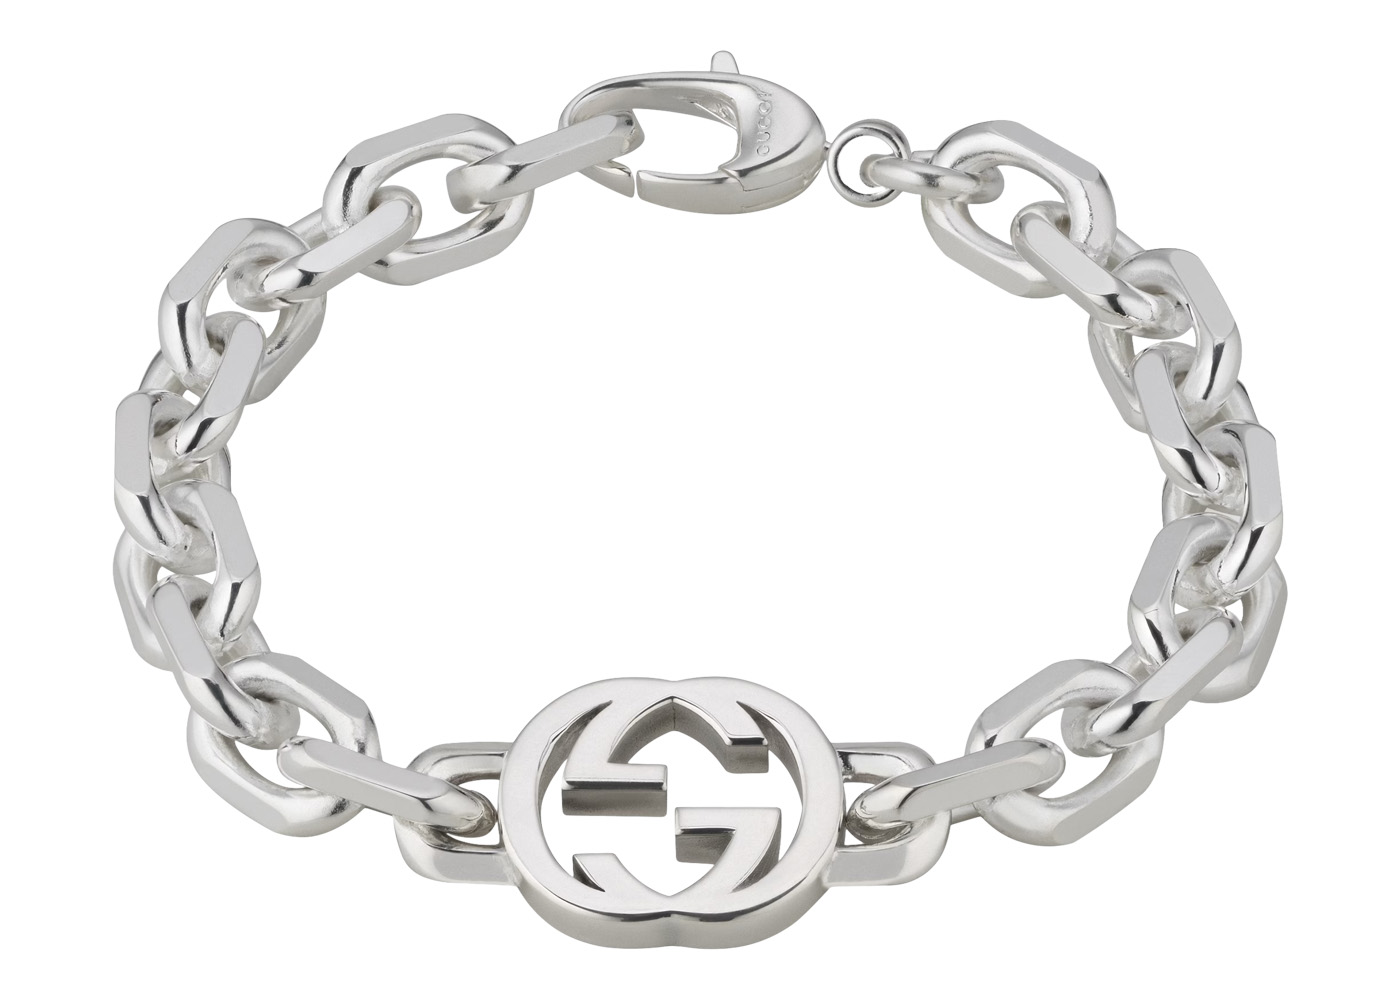 Gucci Interlocking G Chain Bracelet 925 Sterling Silver with Shiny Finish